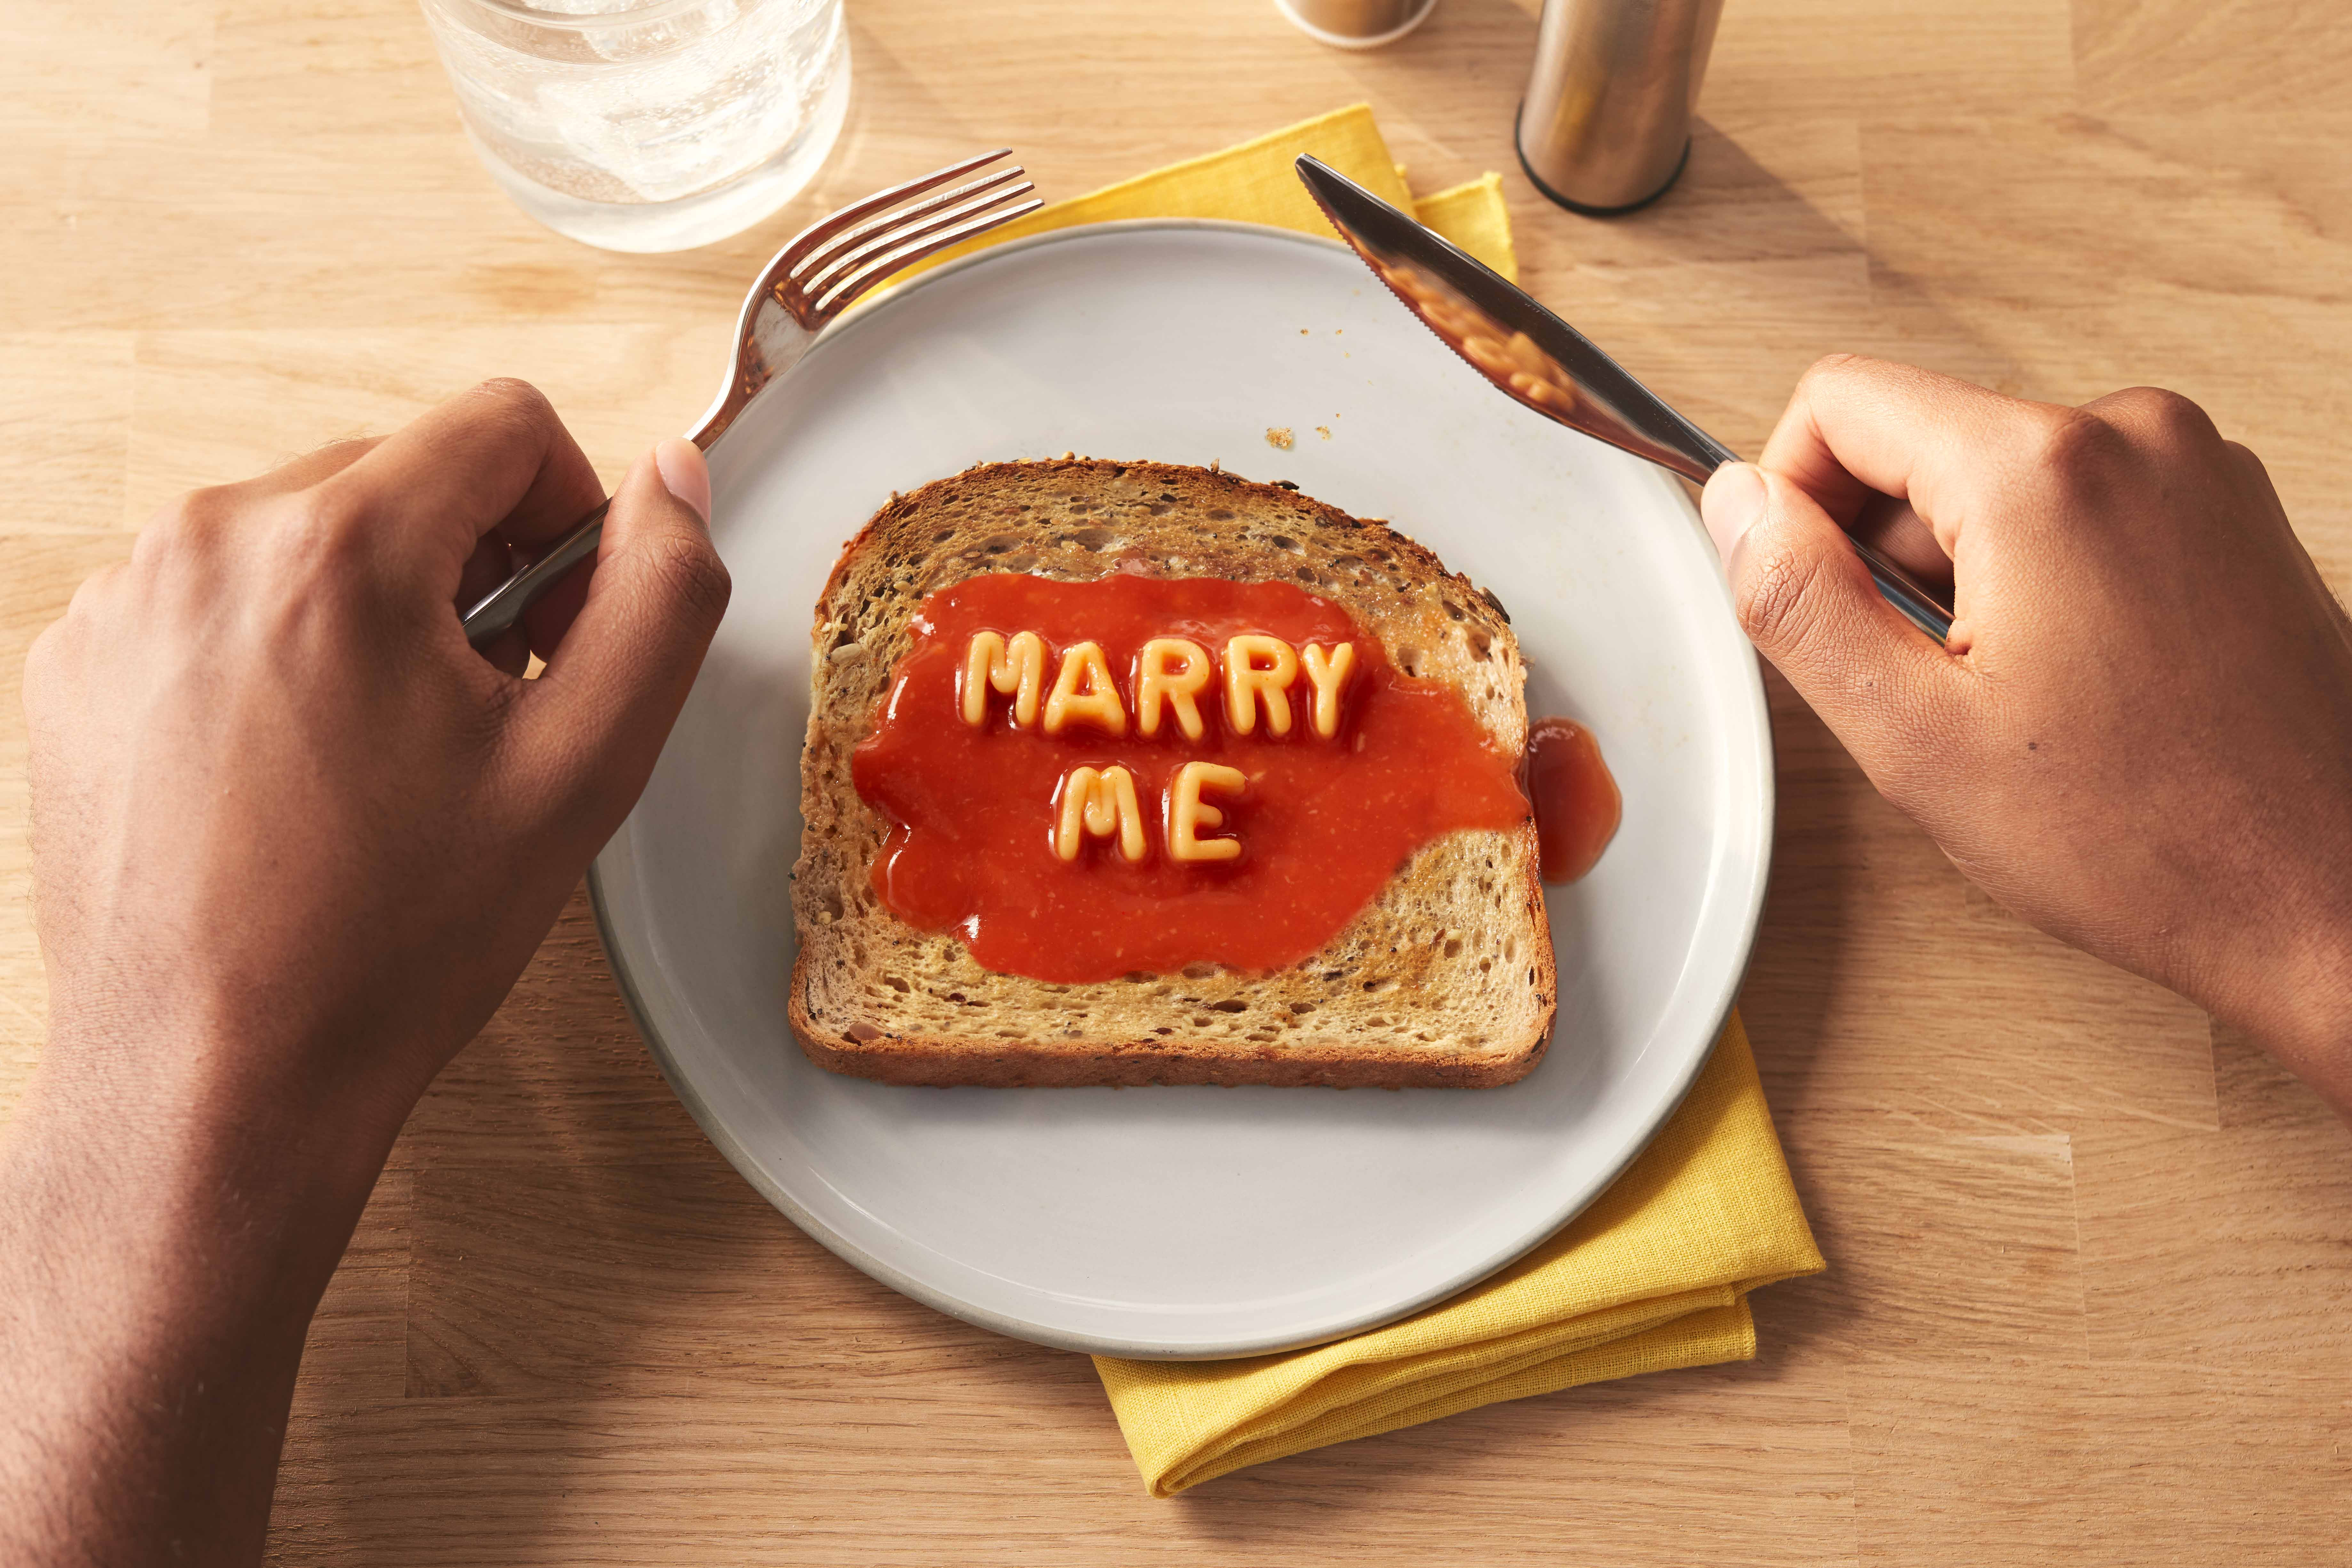 You can now propose with Heinz ‘Marry Me’ Alphabetti Spaghetti, available just in time for Valentine’s Day